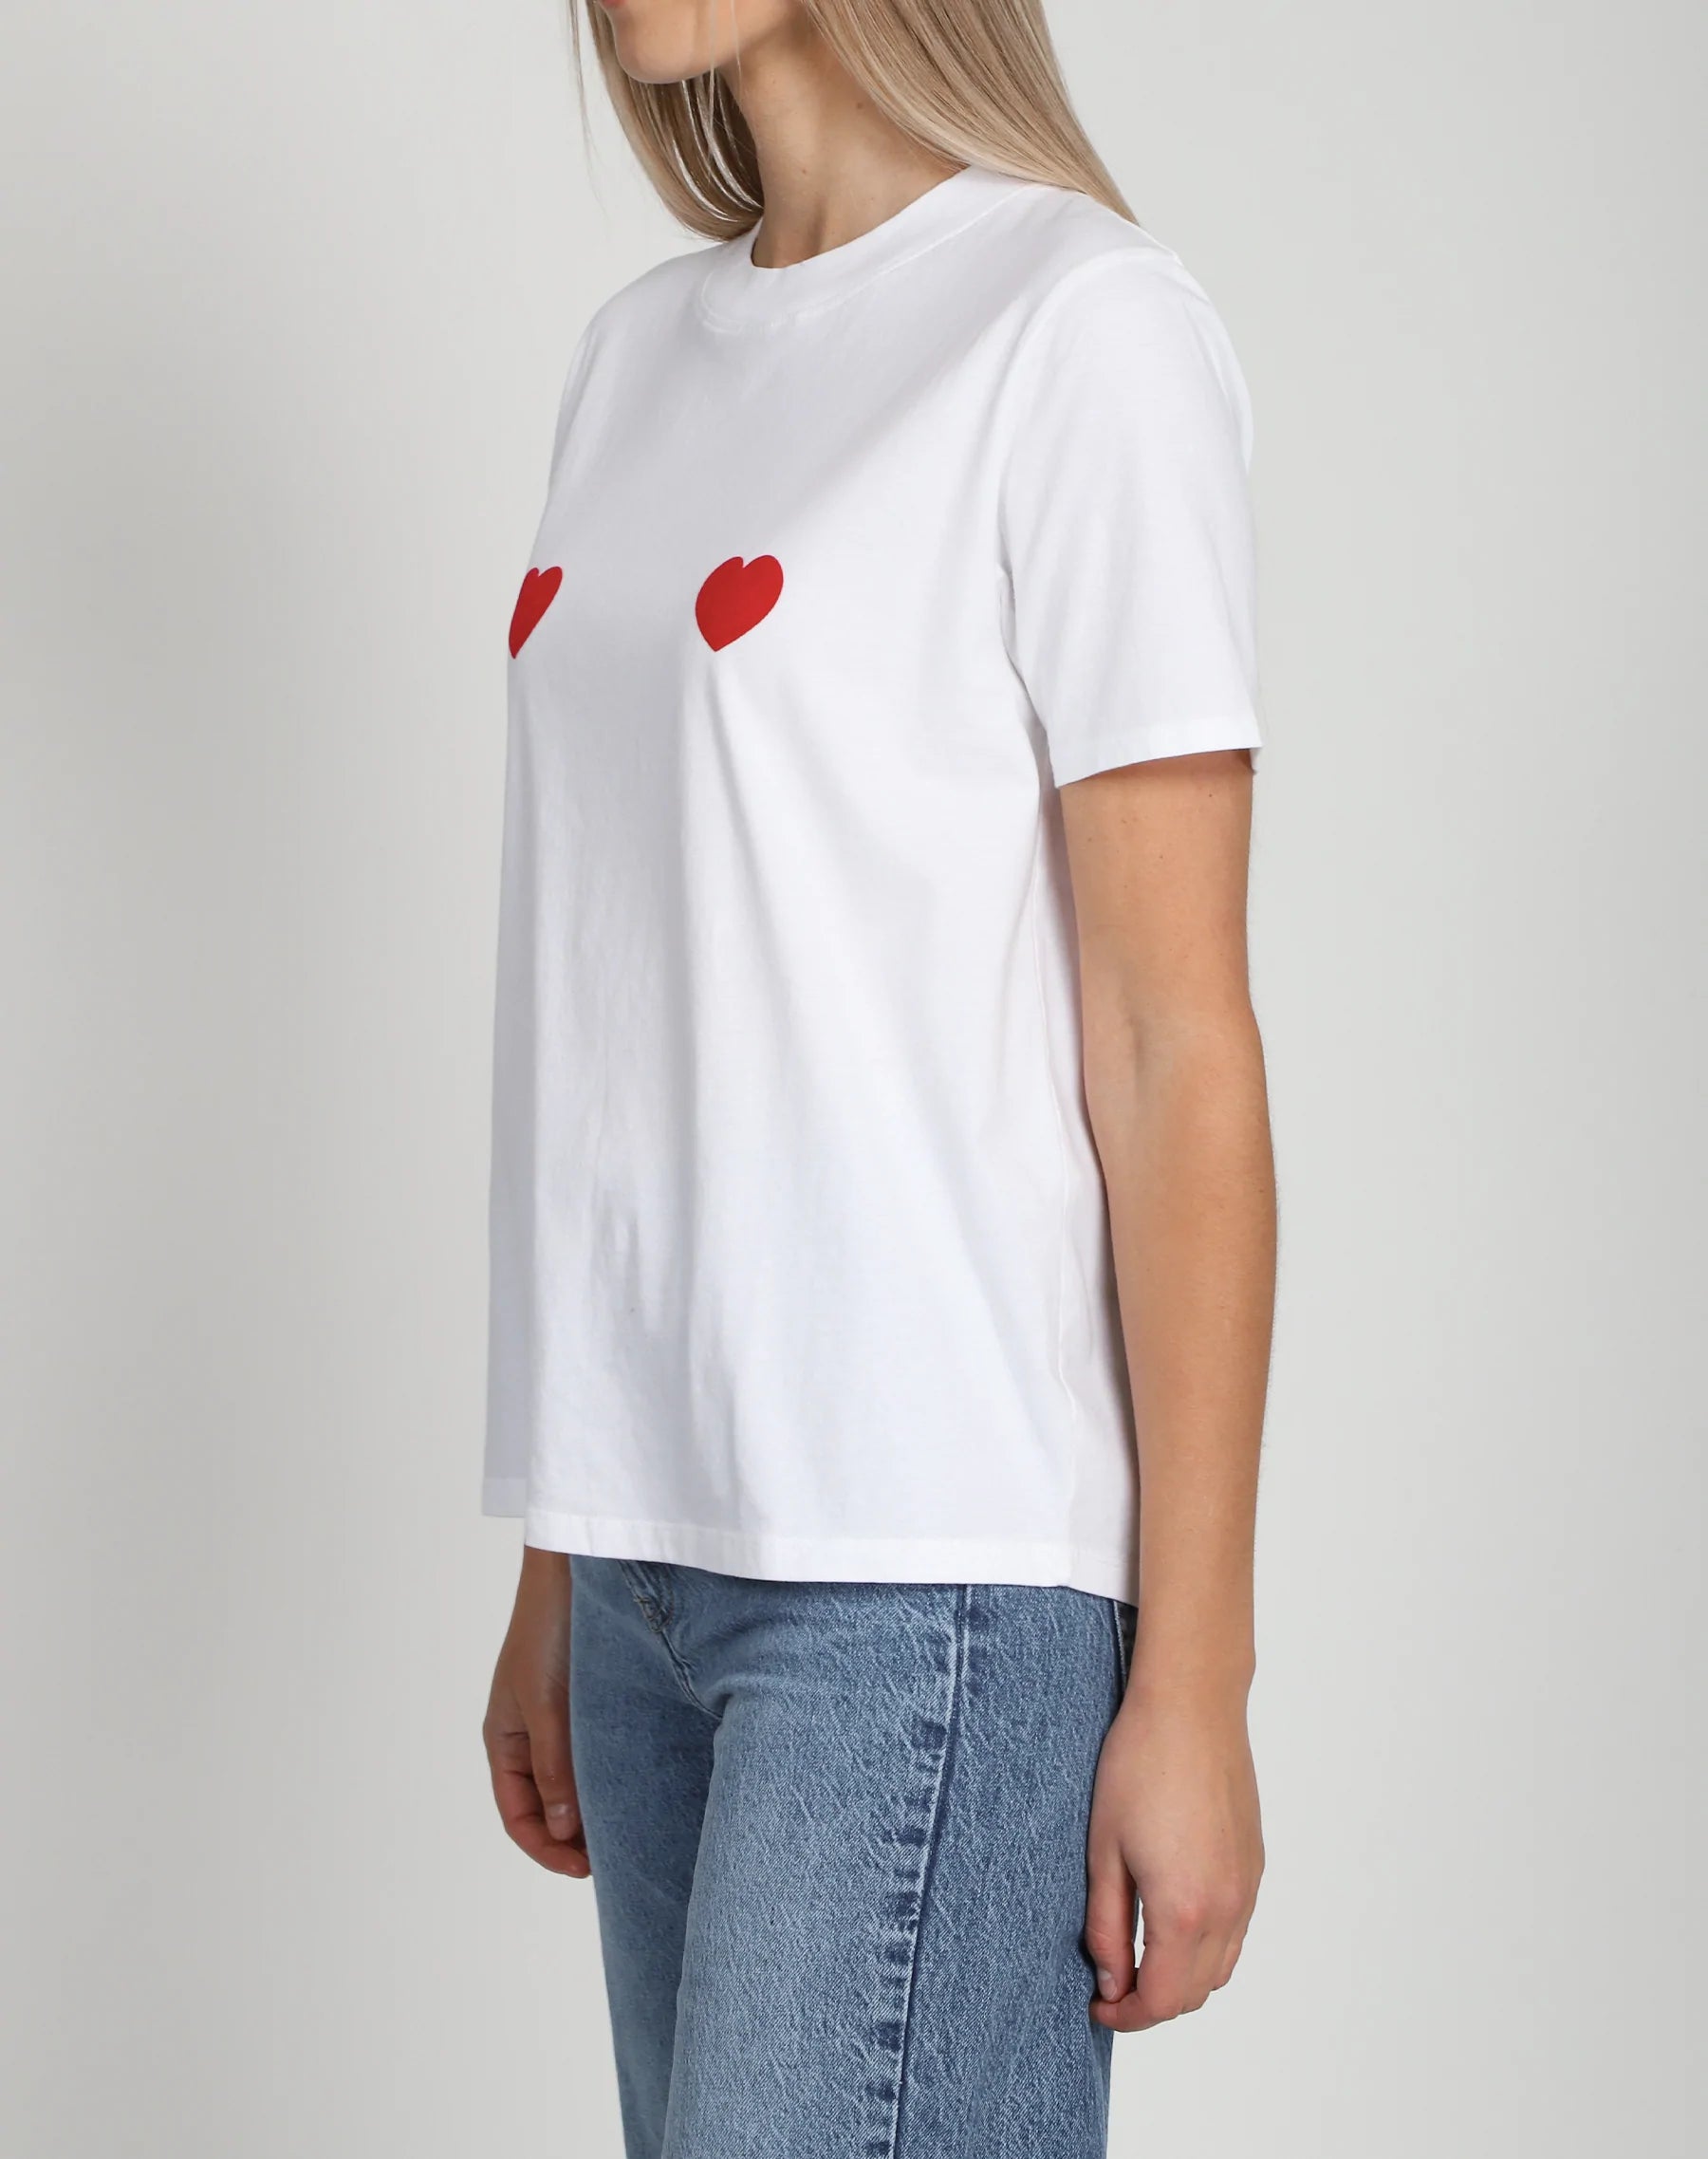 The "DOUBLE HEARTS" Classic Crew Neck Tee | White & Red